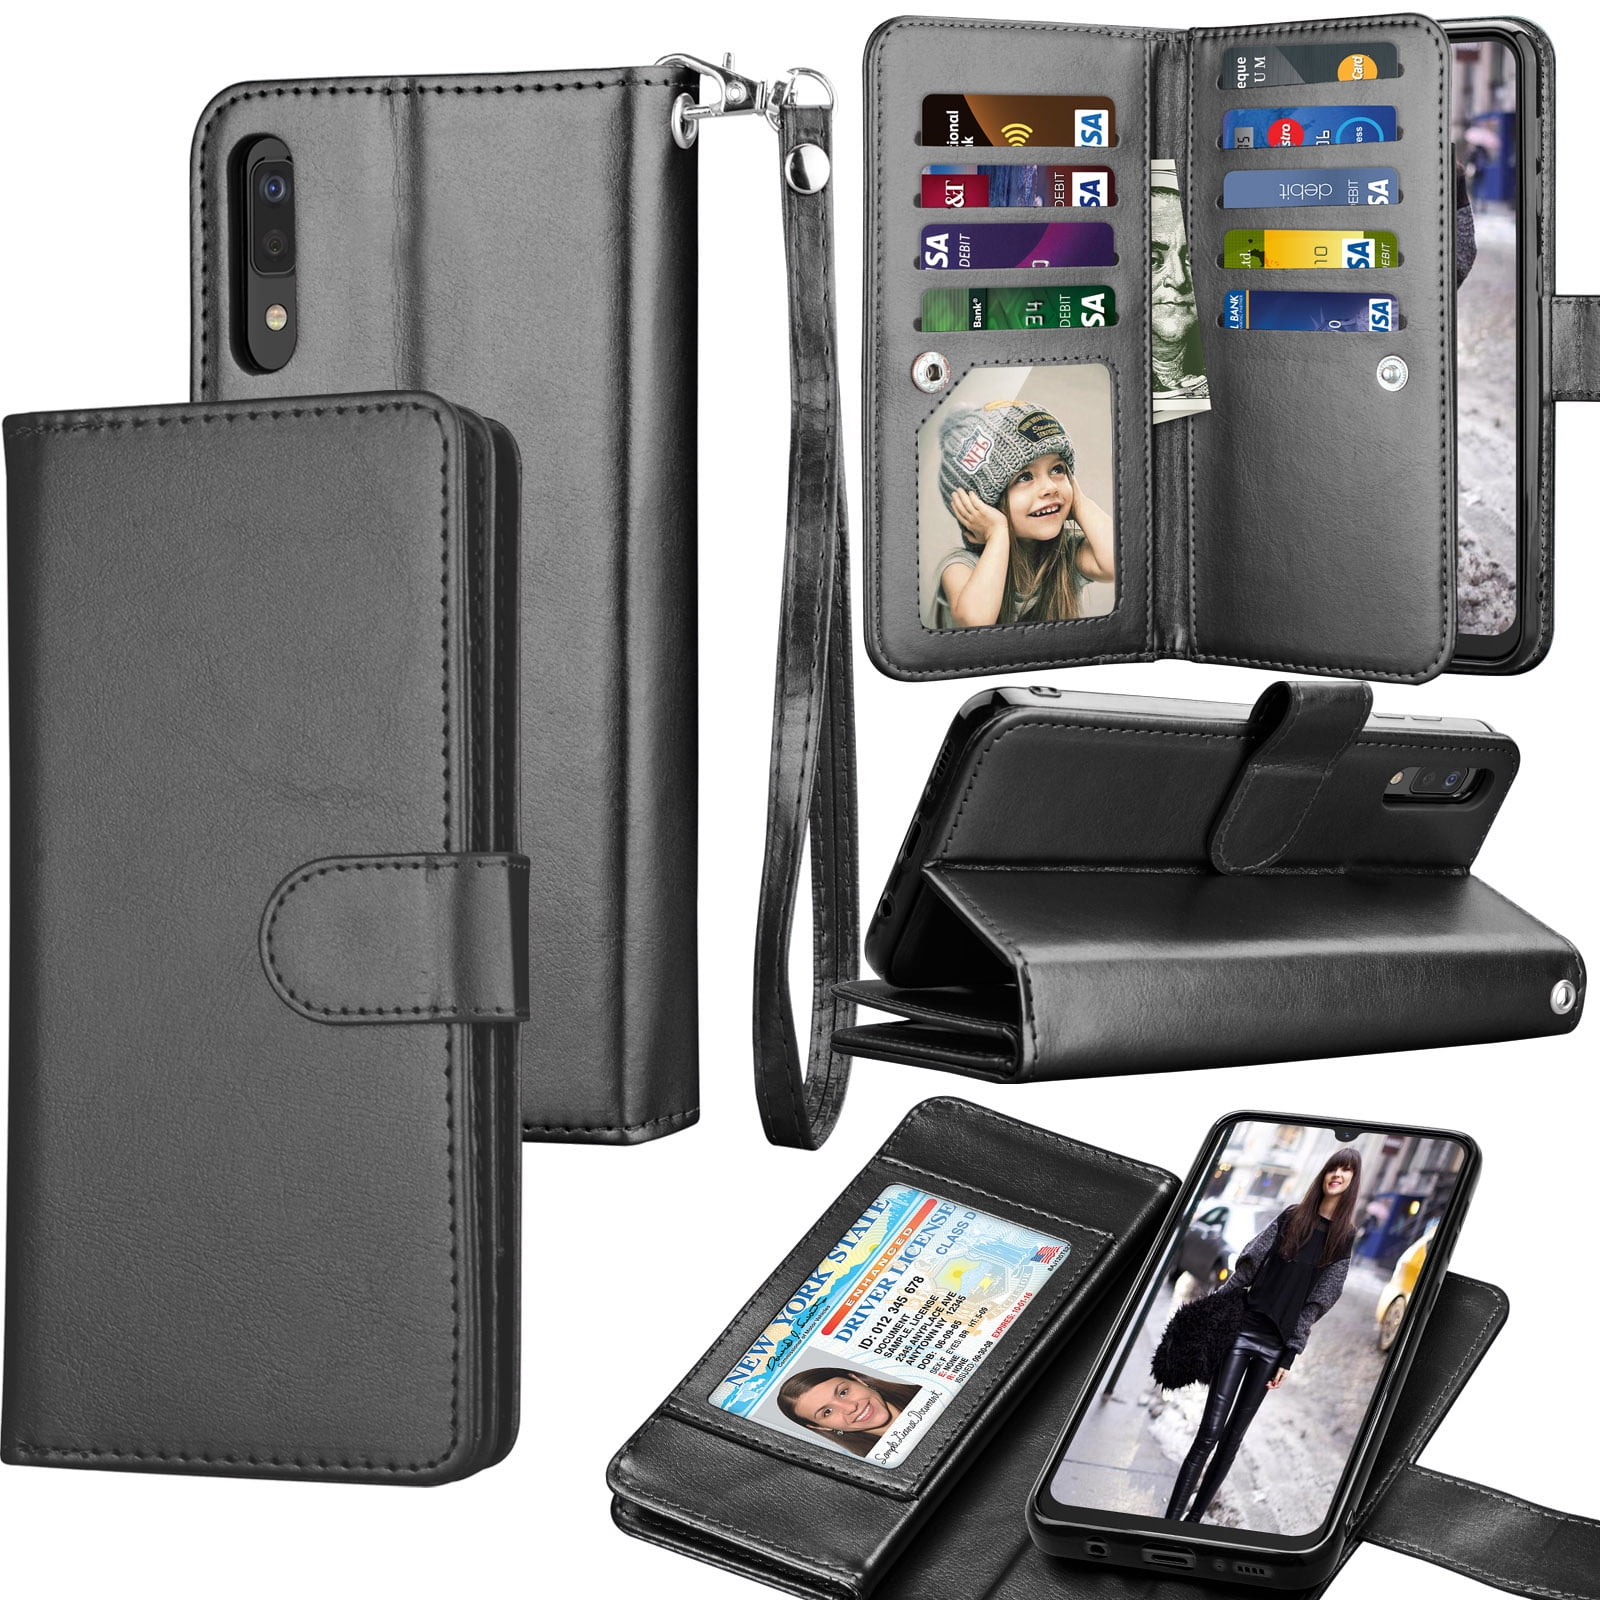 Leather Cover Business Gifts Wallet with Extra Waterproof Underwater Case Flip Case for Samsung Galaxy A70 